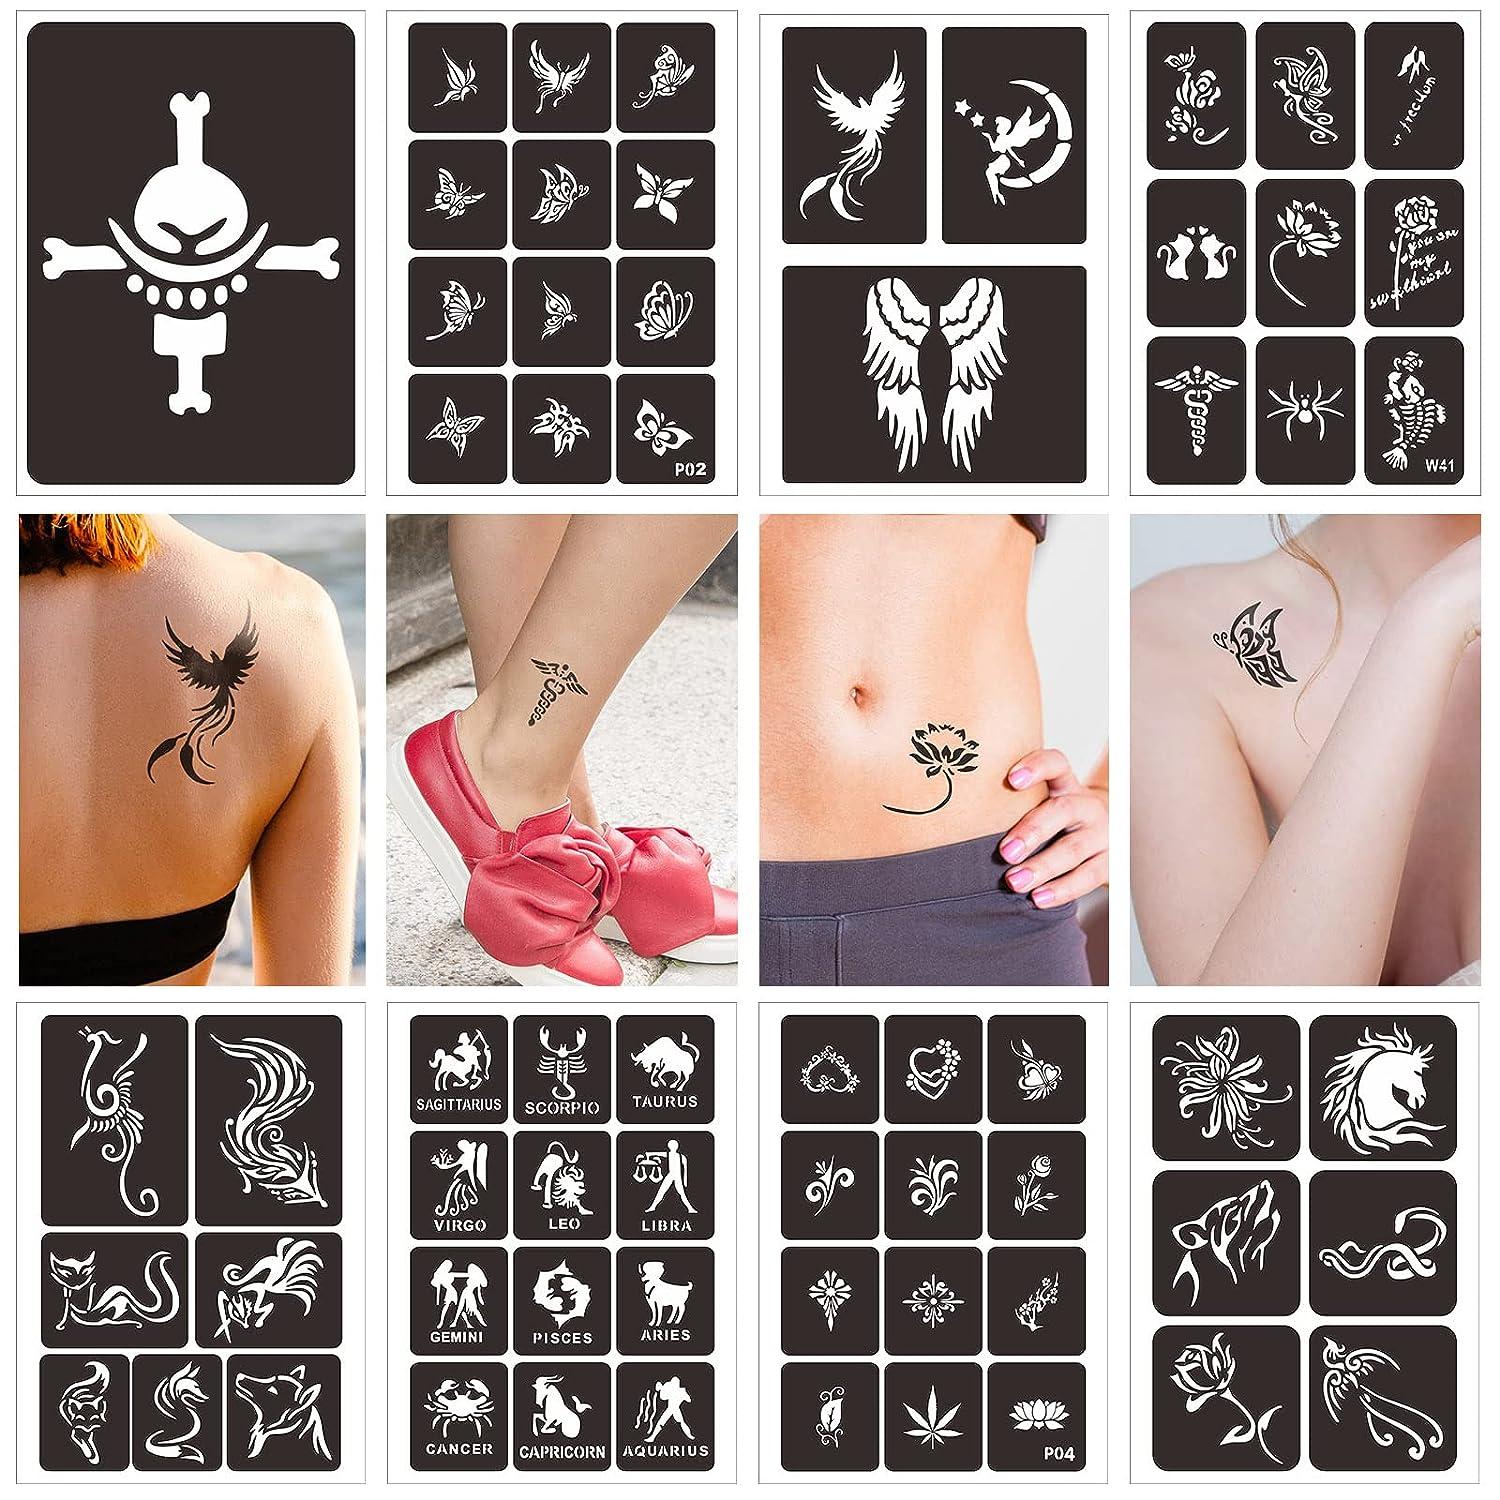 What Tattoo You Should Get, According to Your Zodiac Sign